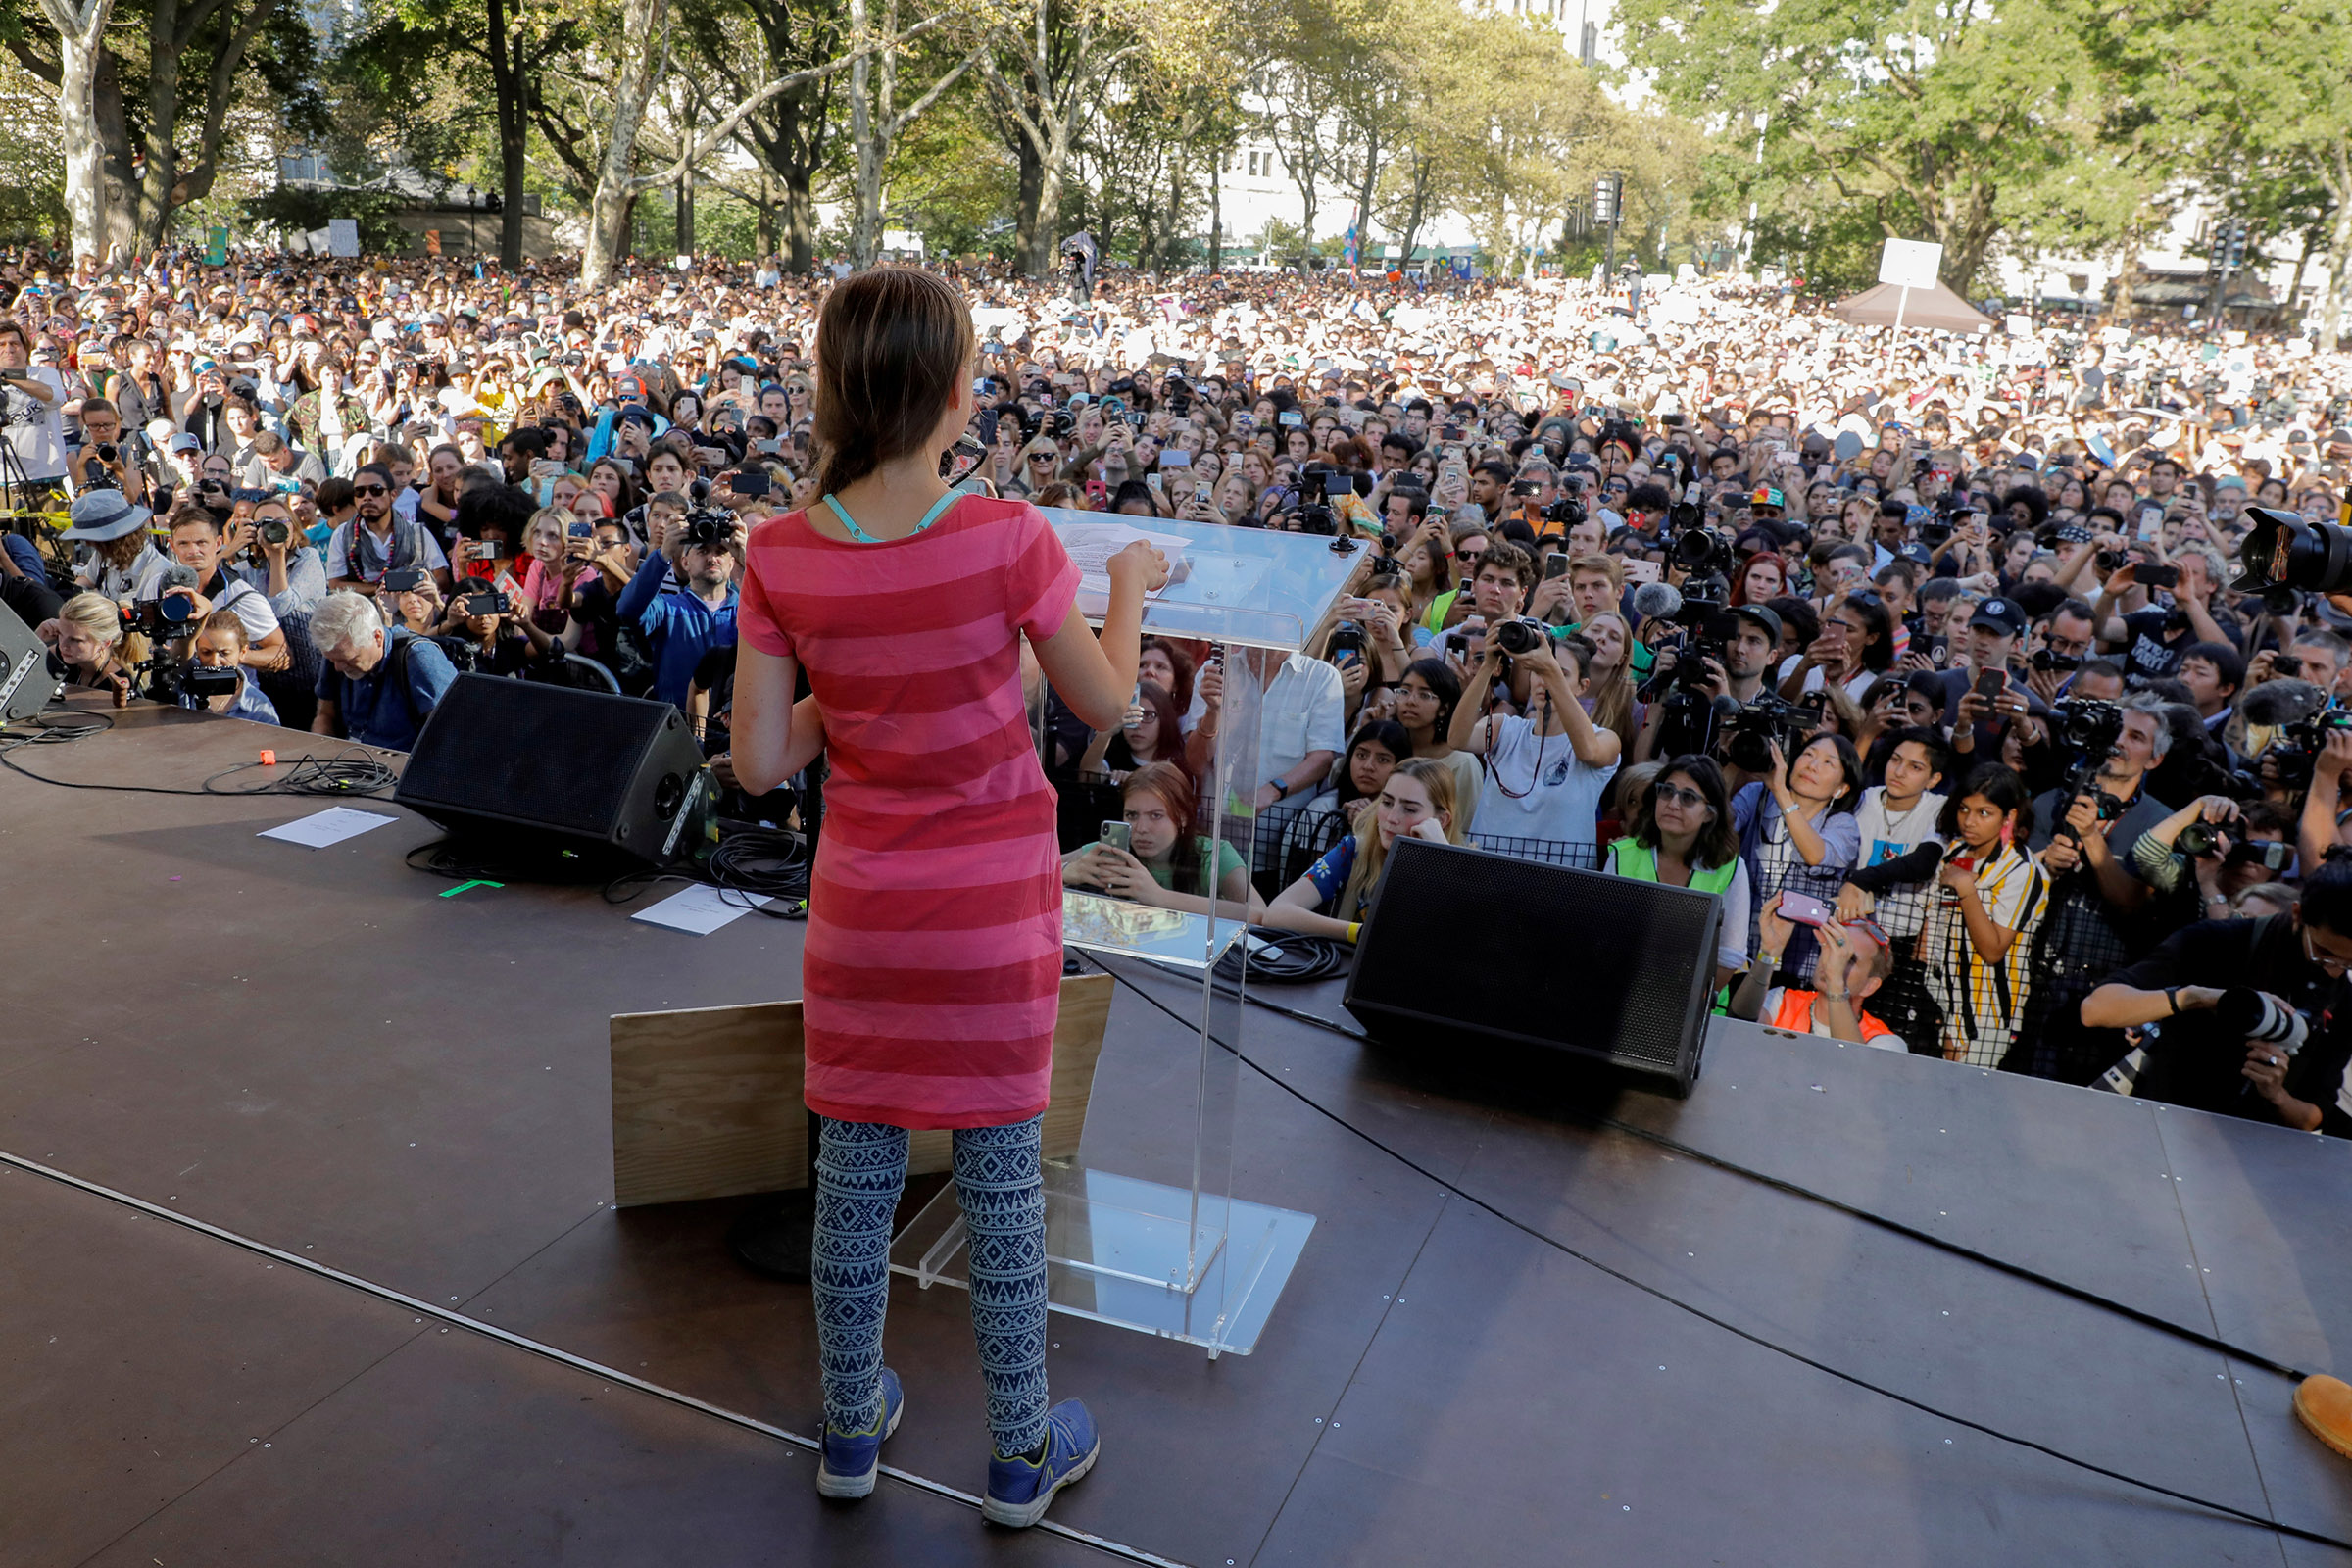 Sixteen year-old Swedish climate activist Greta Thunberg speaks to a large crowd of demonstrators at the Global Climate Strike in lower Manhattan in New York, U.S., September 20, 2019. (Lucas Jackson—Reuters)